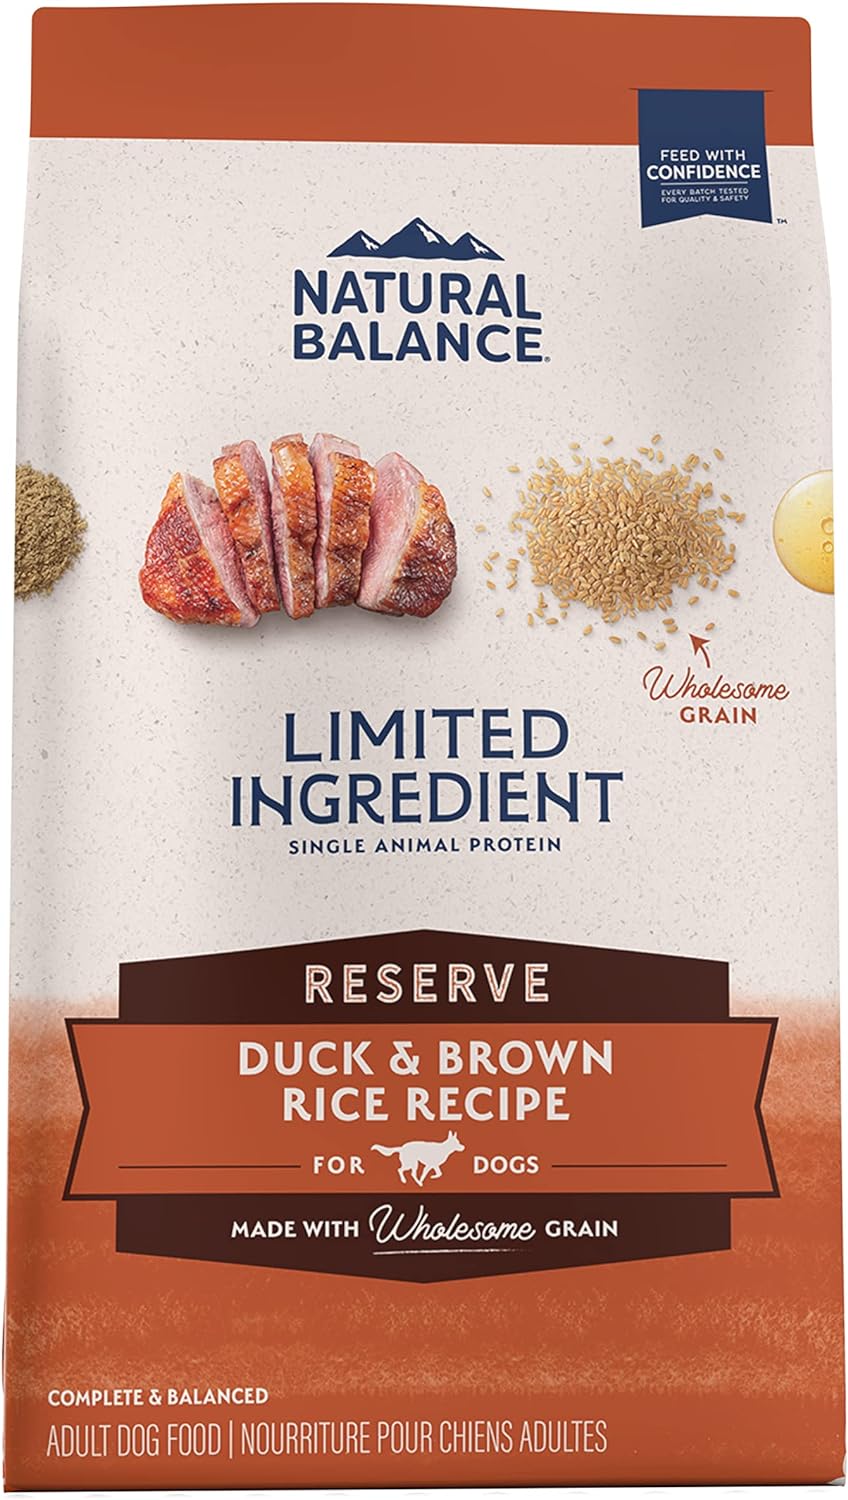 Natural Balance Limited Ingredient Adult Dry Dog Food with Healthy Grains, Reserve Duck & Brown Rice Recipe